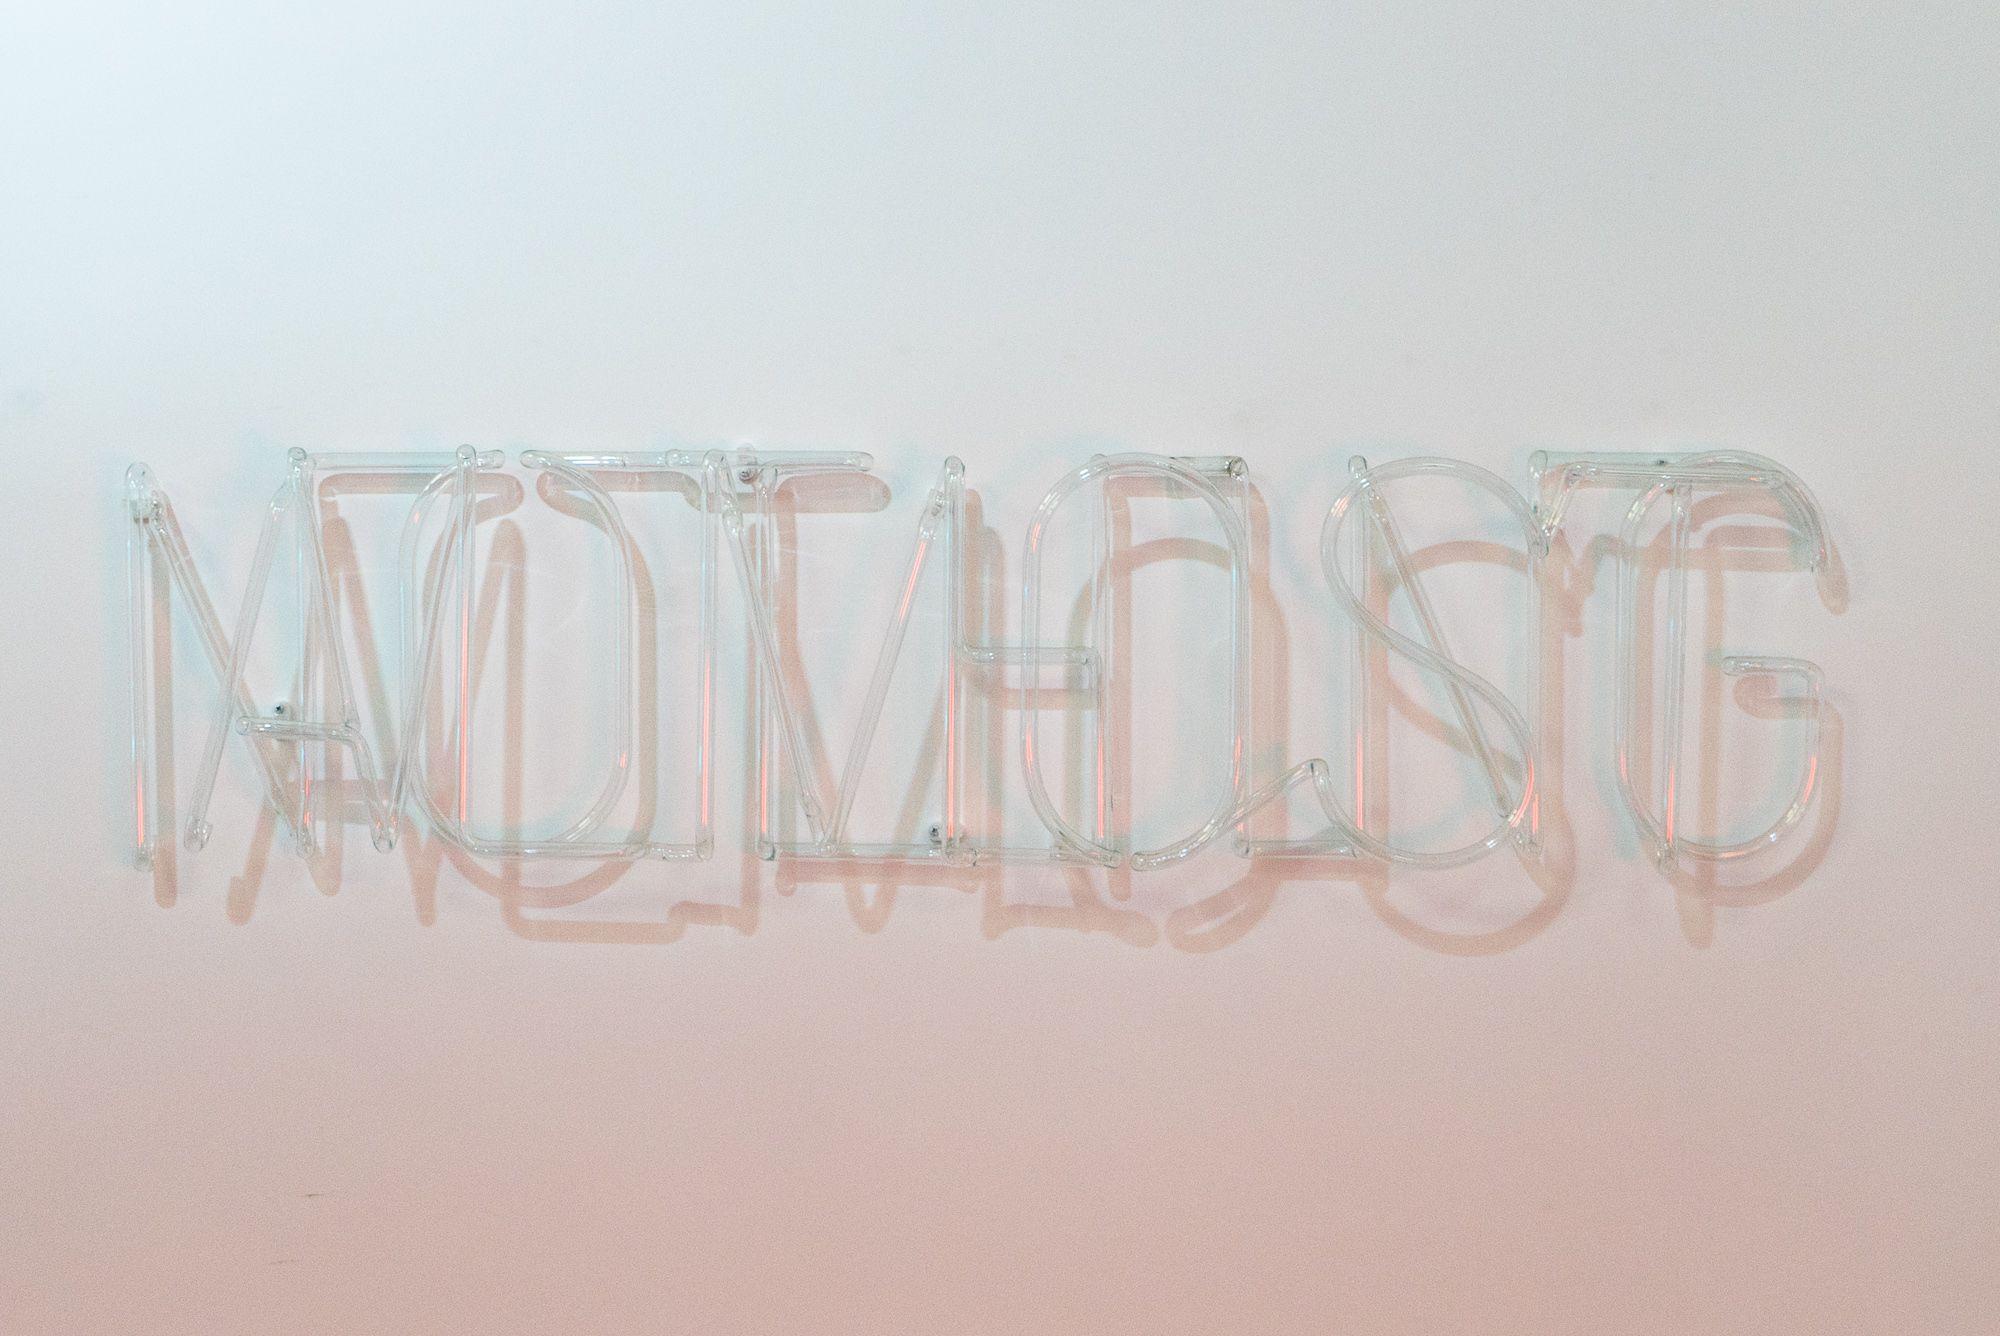 The words "ALMOST NOTHING" are sculpted out of clear glass tubing, they are mounted on the wall overlapping.